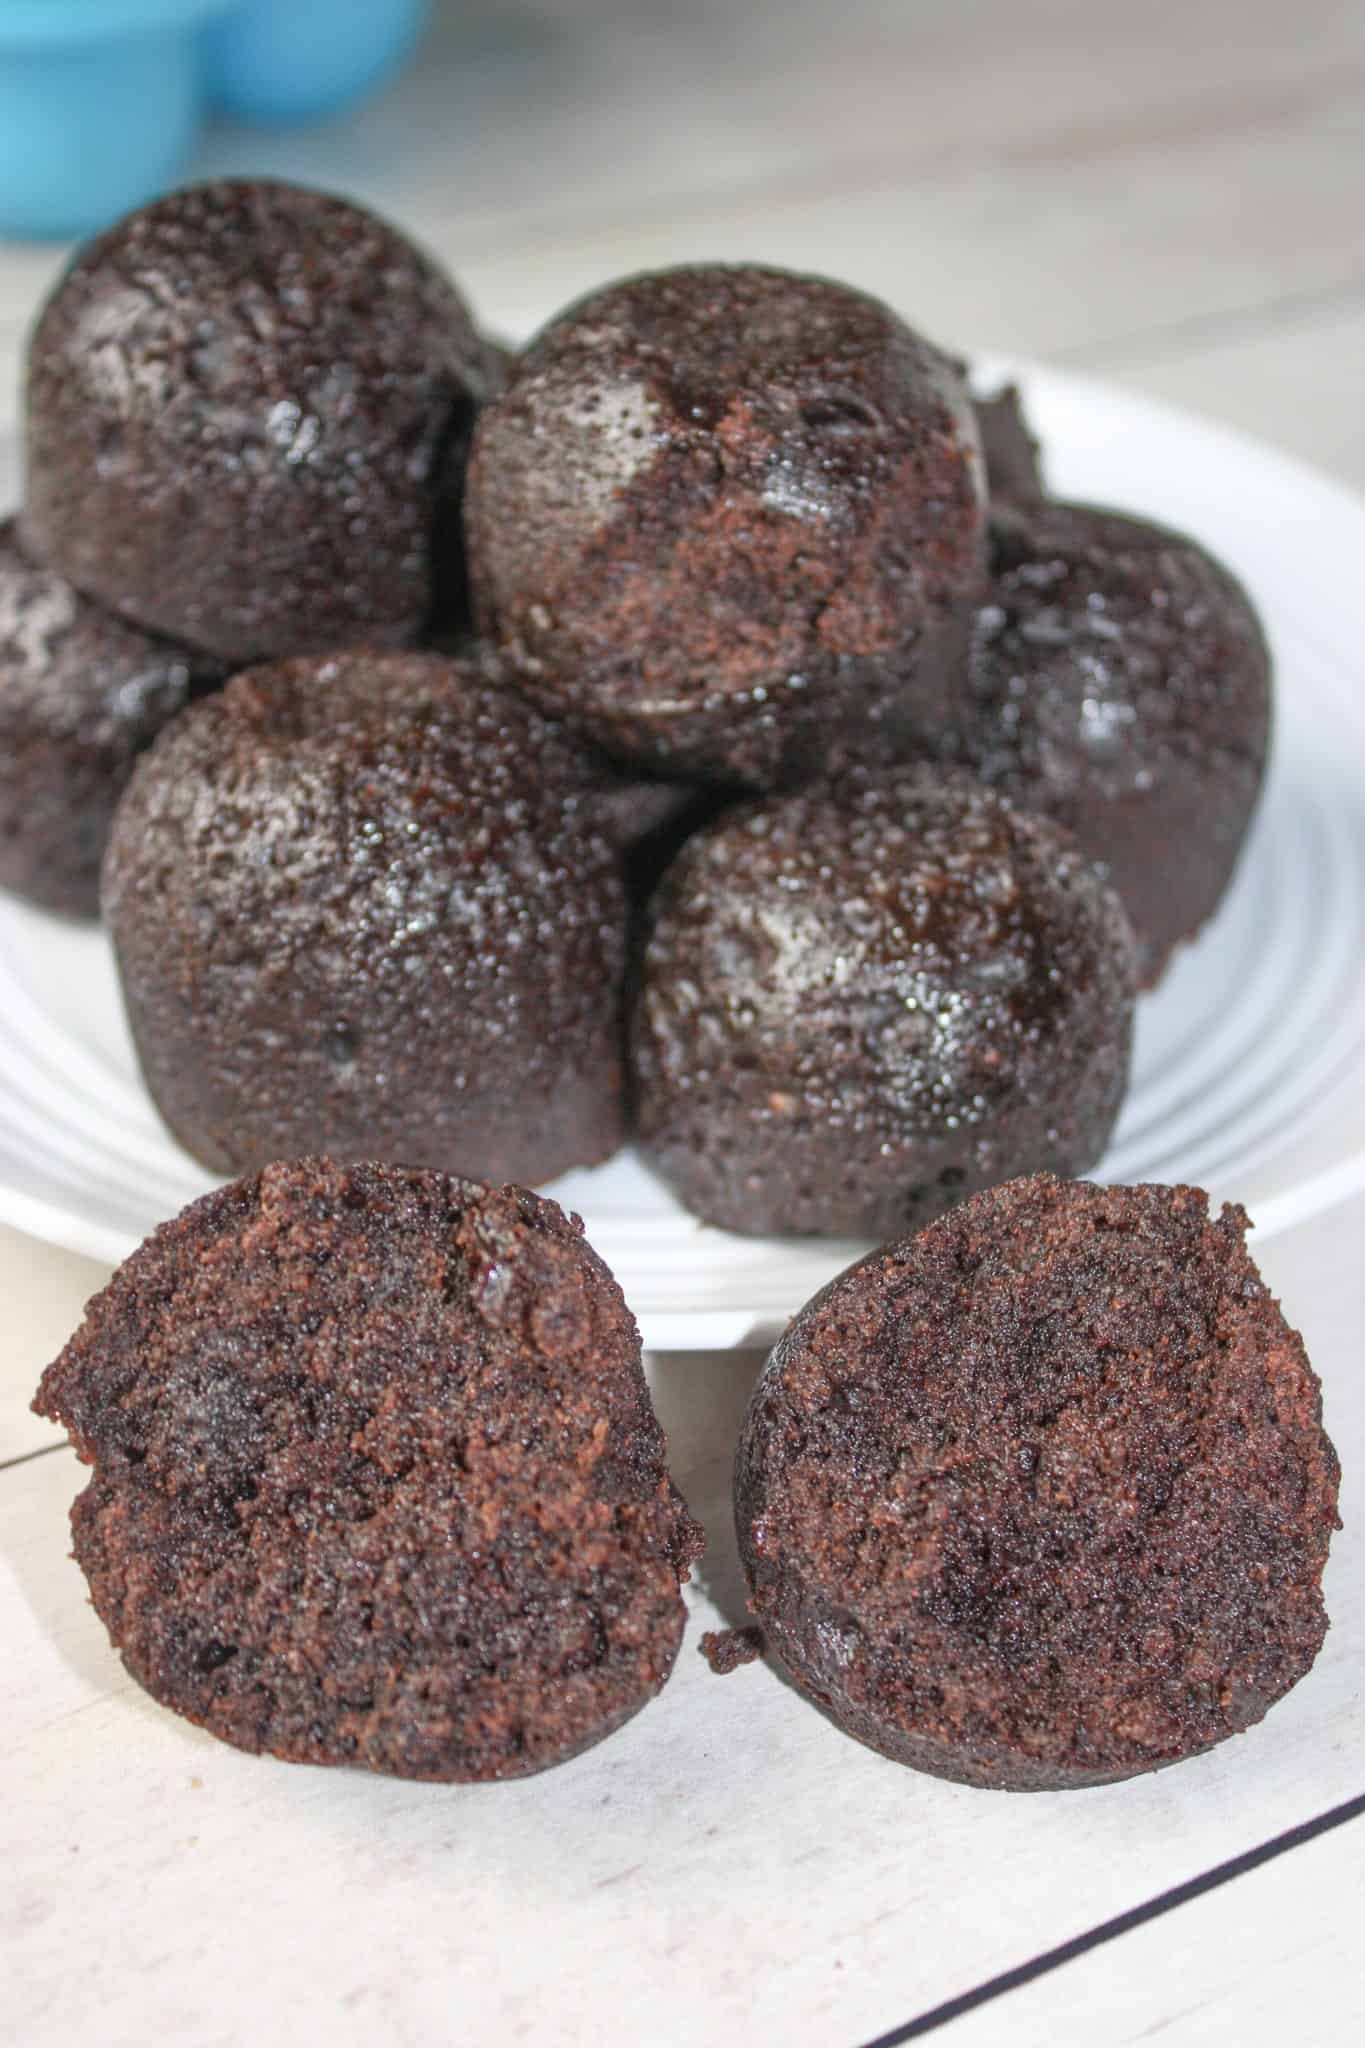 Instant Pot Brownie Bites are a delicious little treat.  These moist, chocolate, pressure cooker bites will be a little slice of heaven for those that have to avoid gluten!